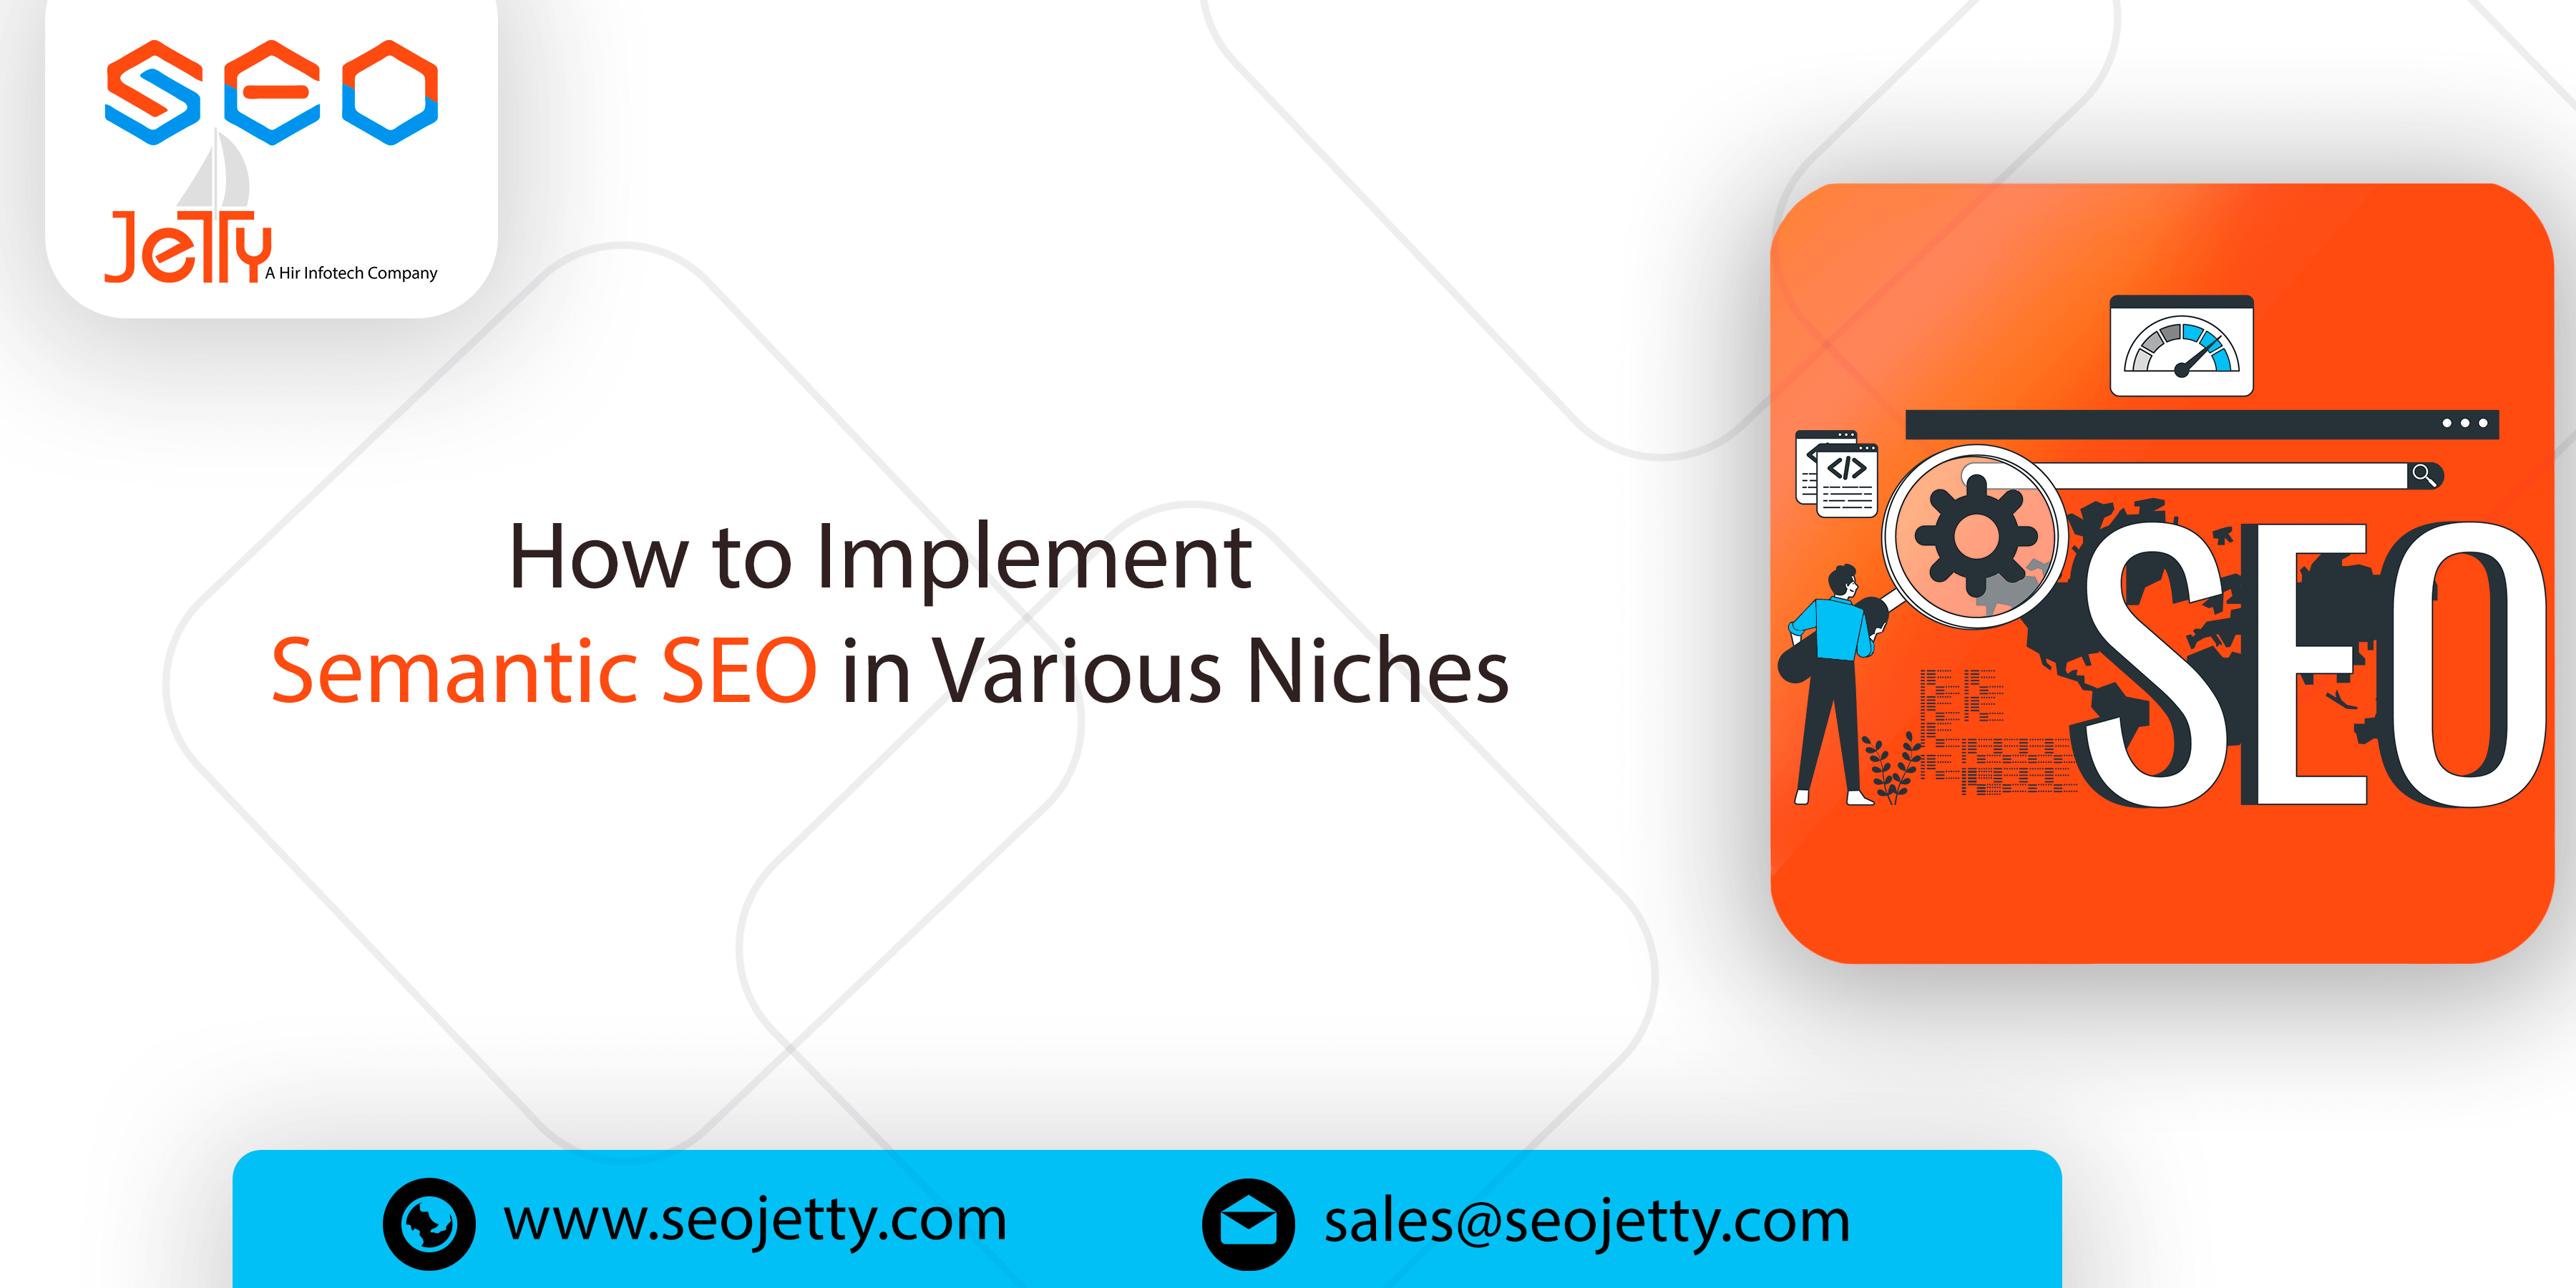 How to Implement Semantic SEO in Various Niches